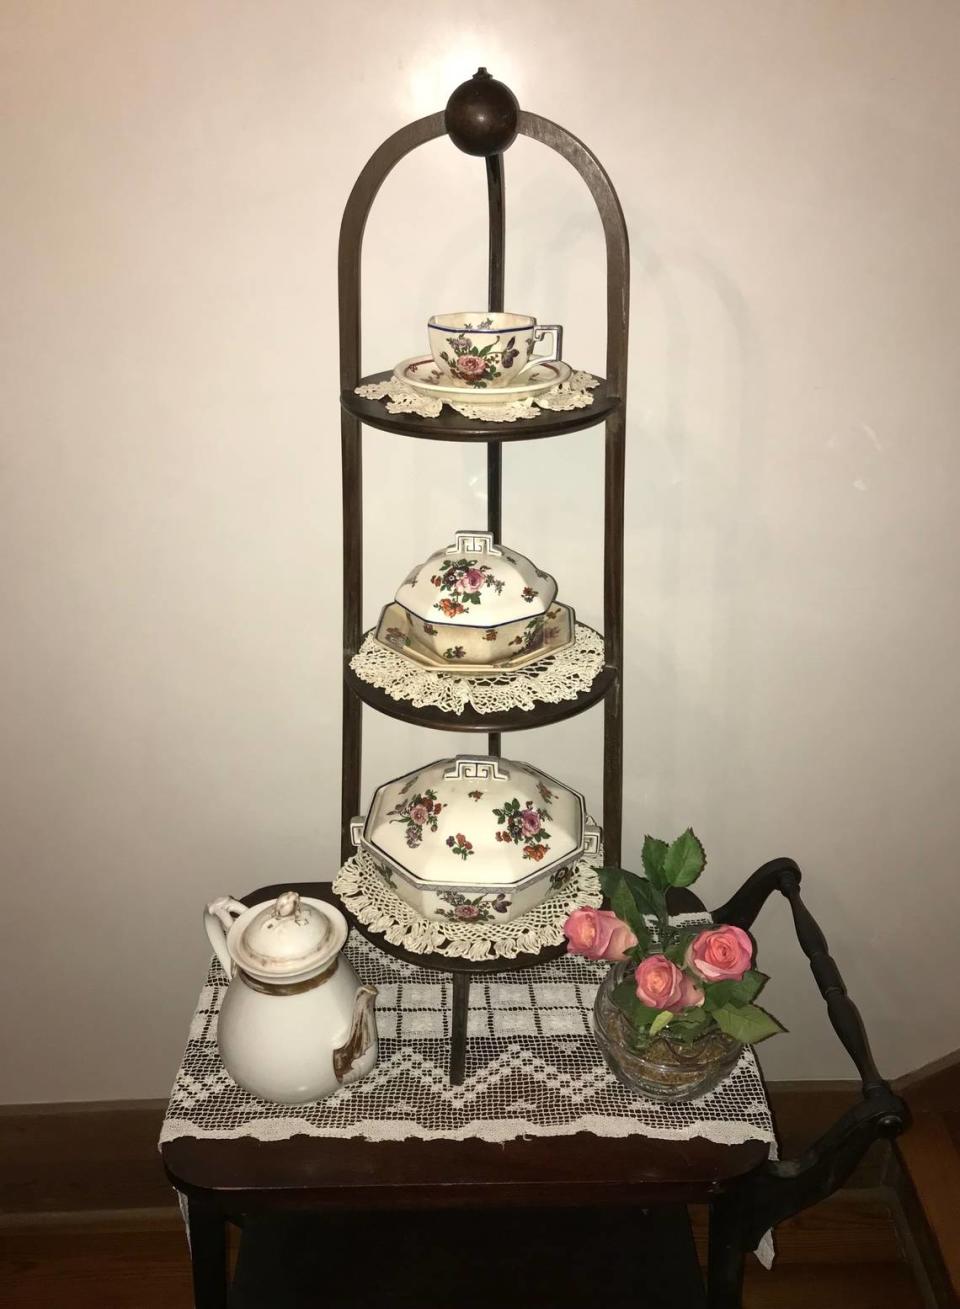 You can see vintage tea sets like this one by Royal Doulton at the Coral Gables Merrick House, 2 to 5 p.m. Sunday, March 26, as part of the Merrick House Tea Jubilee.